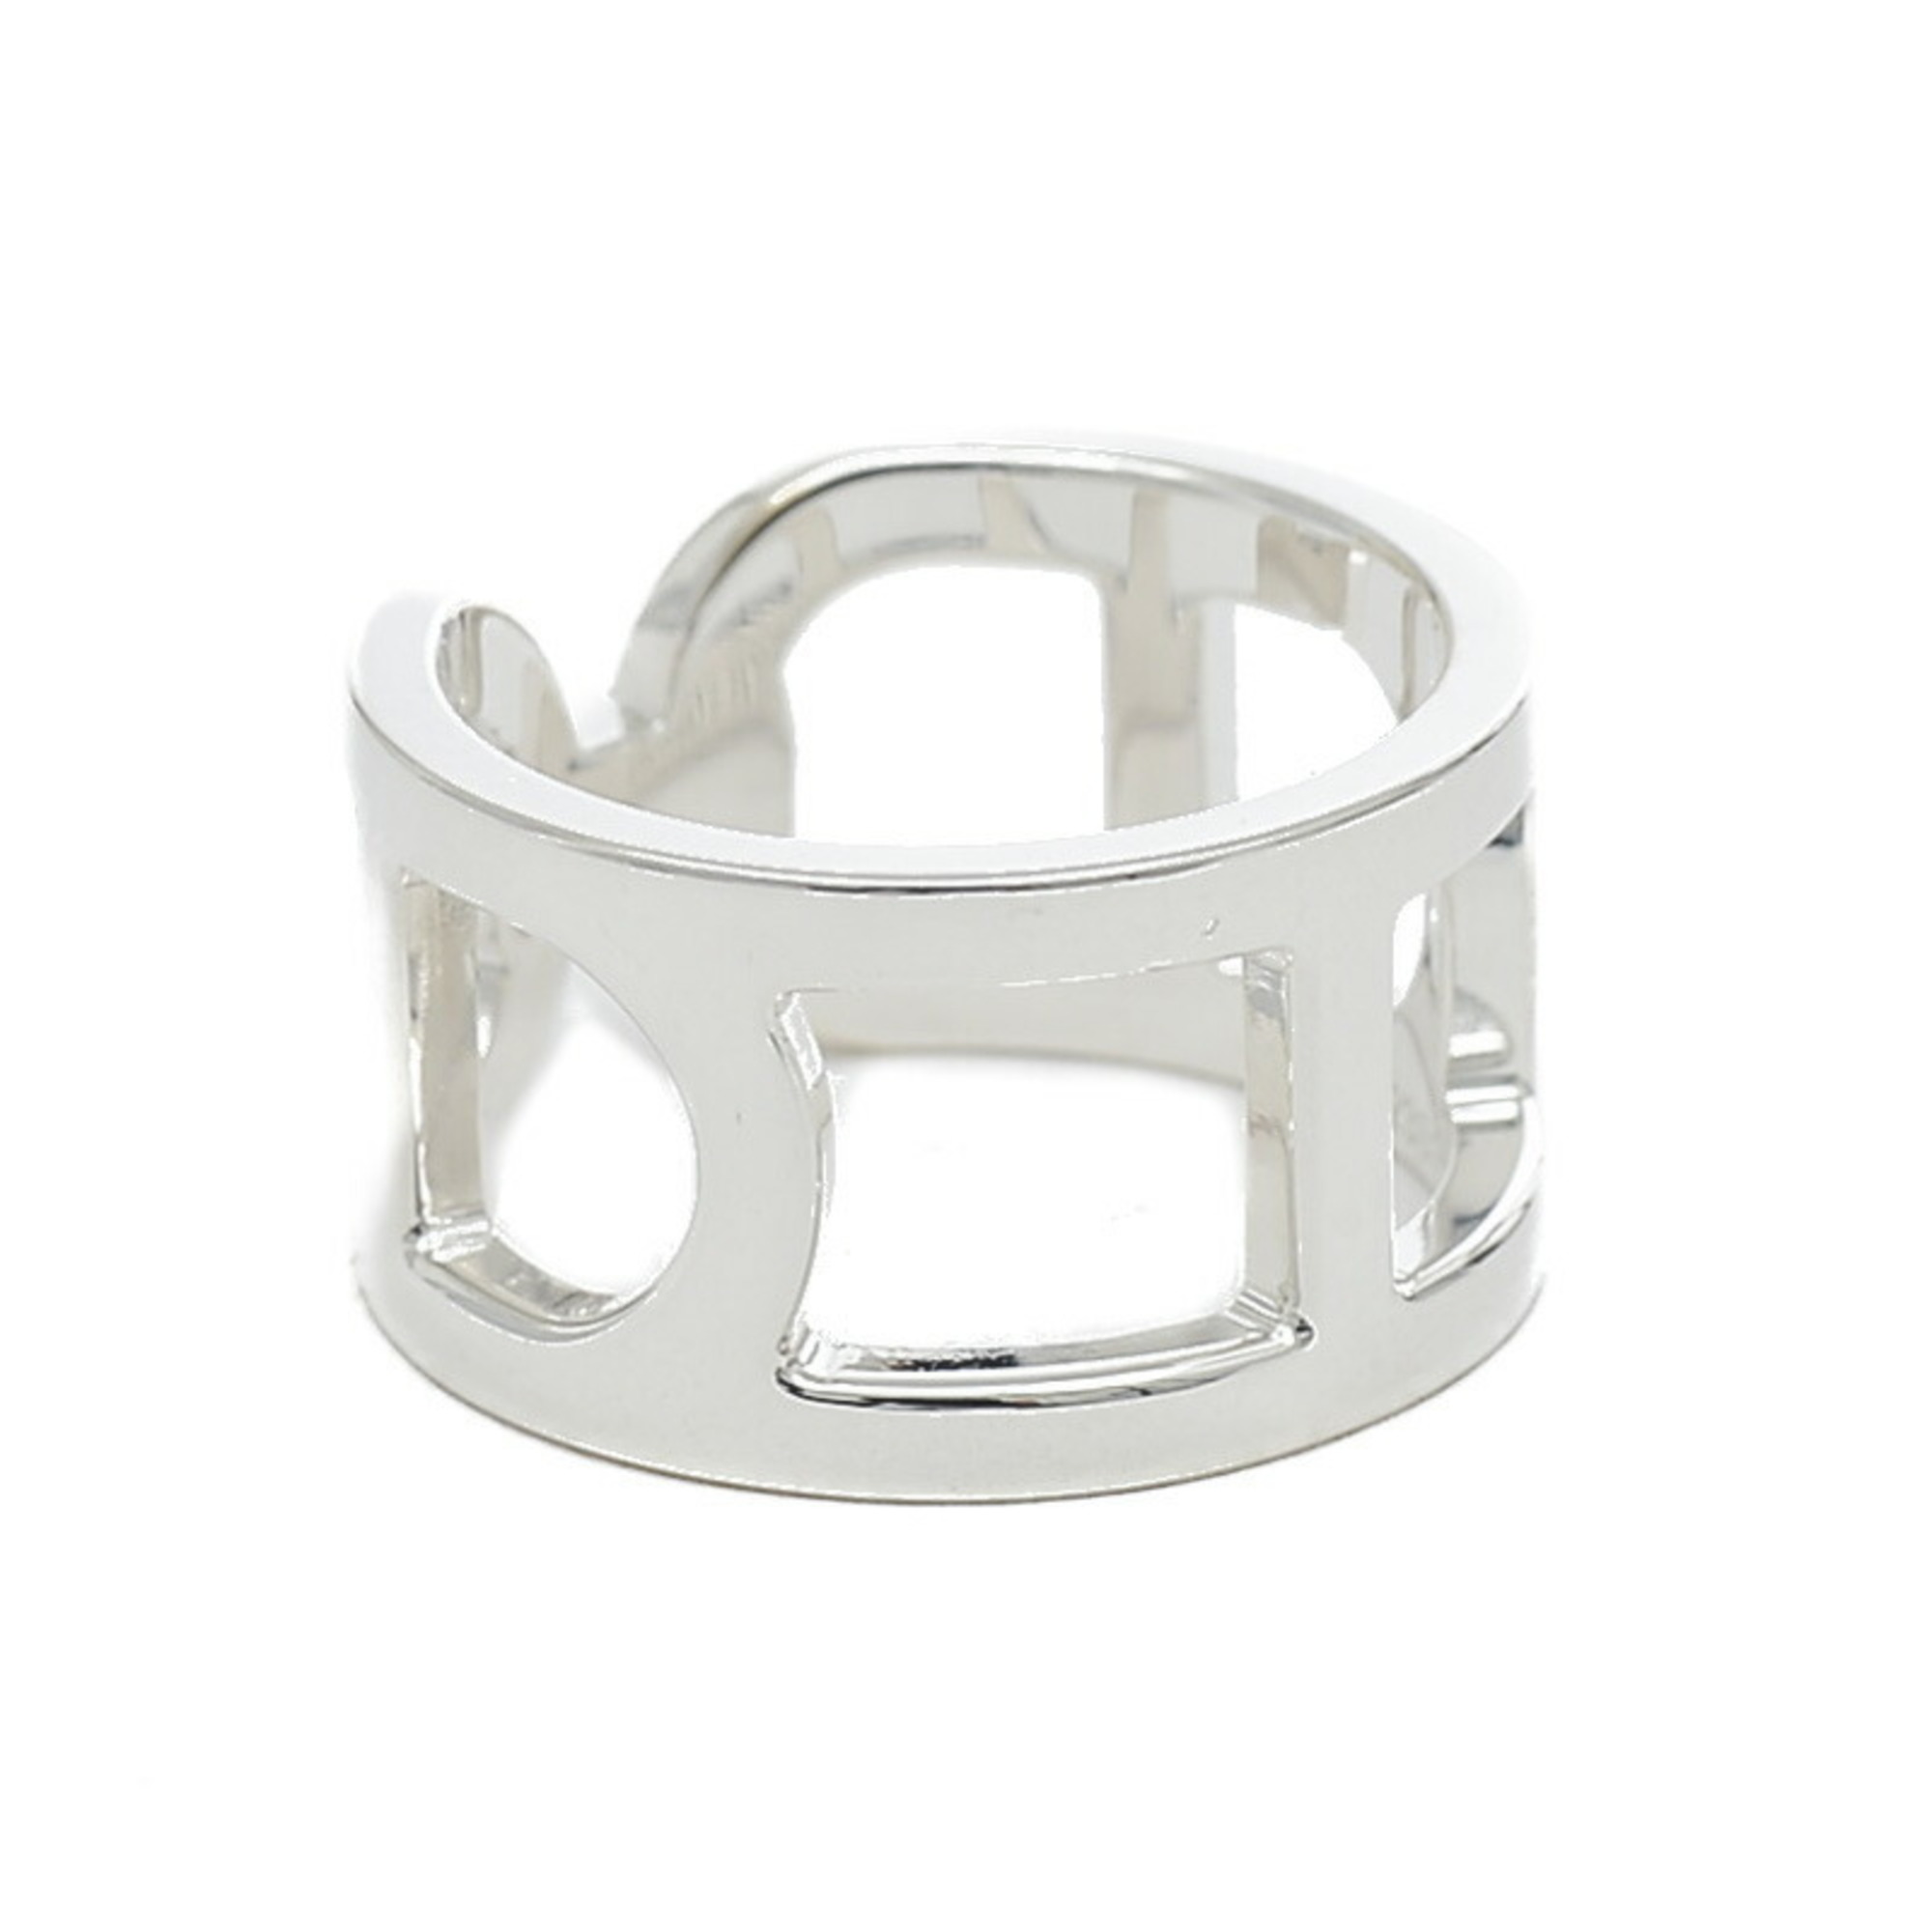 Hermes Ever Chaine d'Ancre Ring Silver SV925 #50